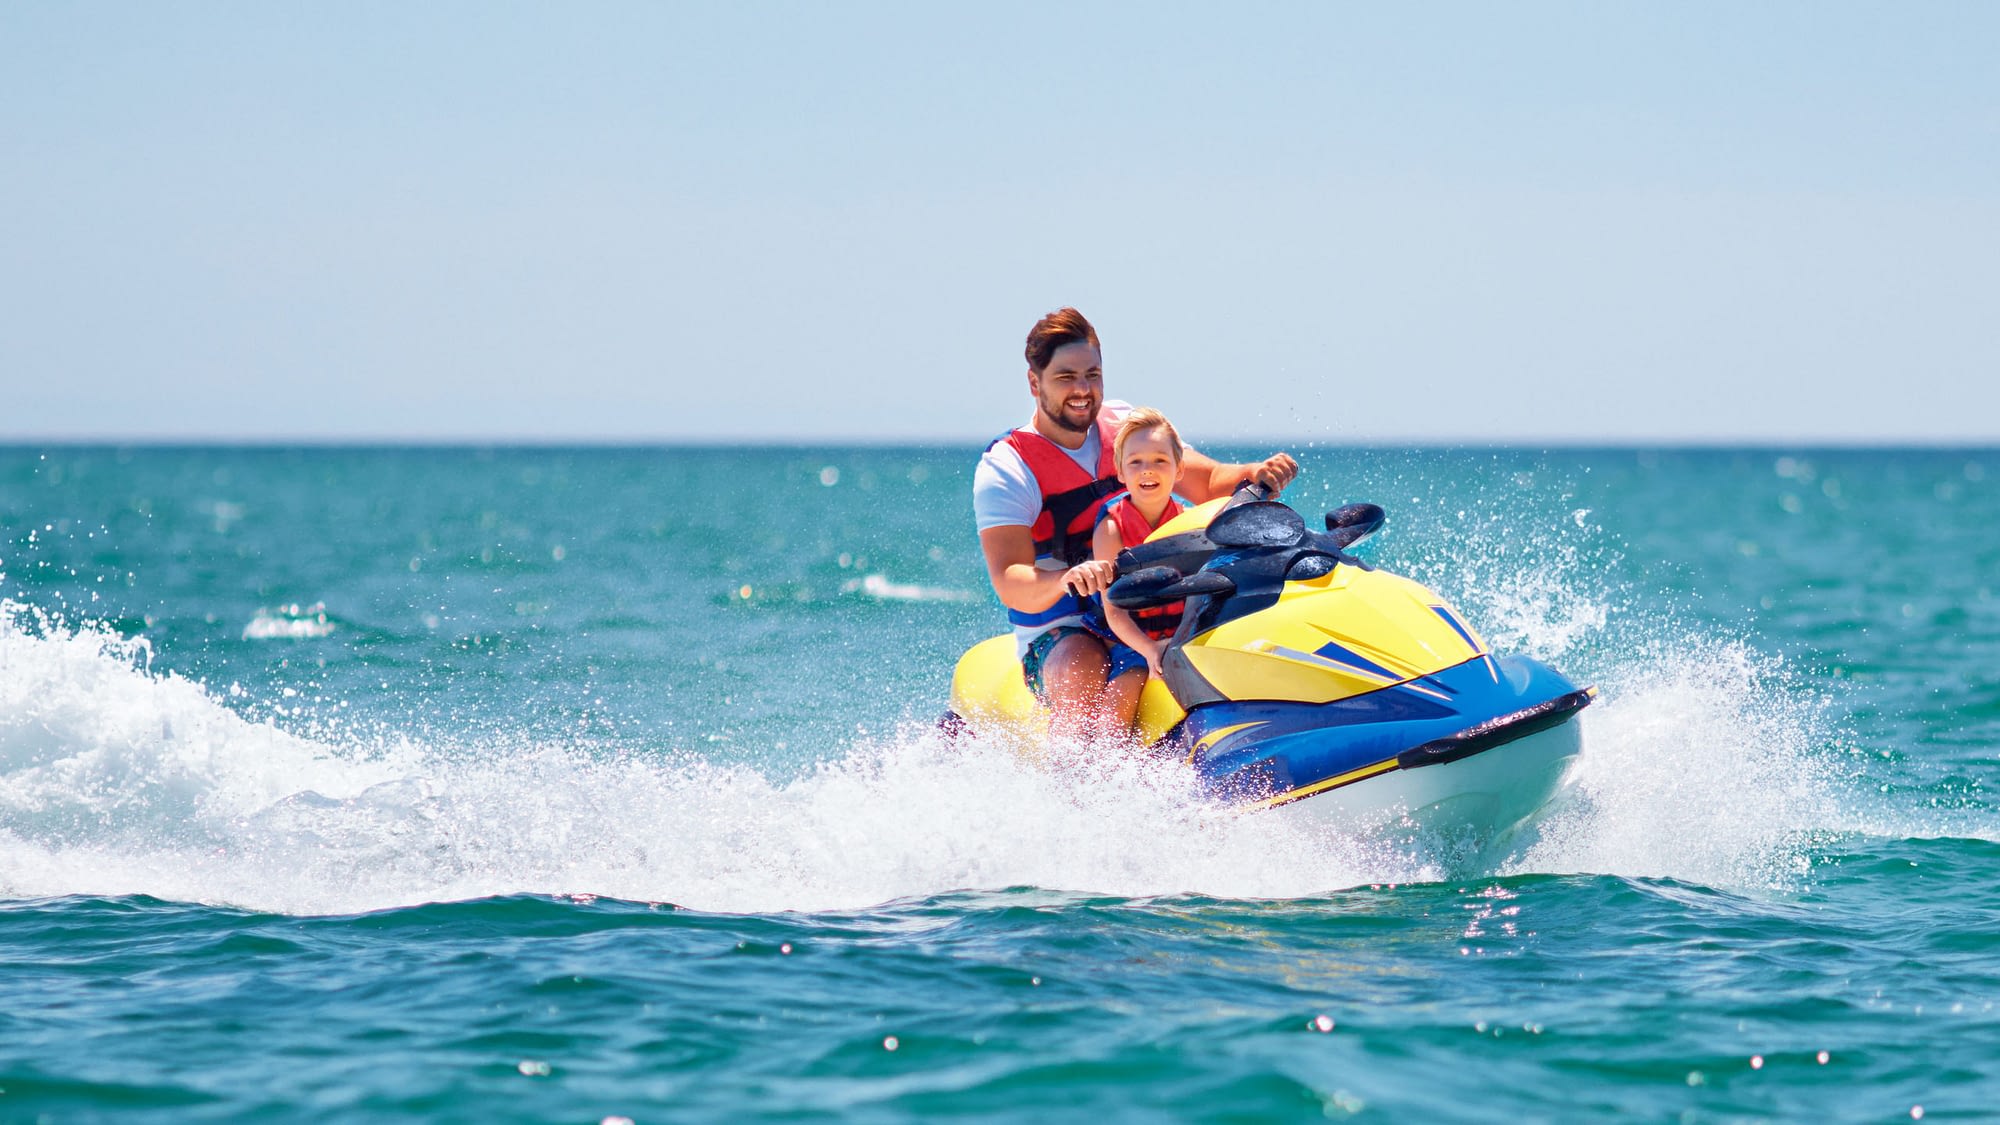 Father and son riding a jet ski.